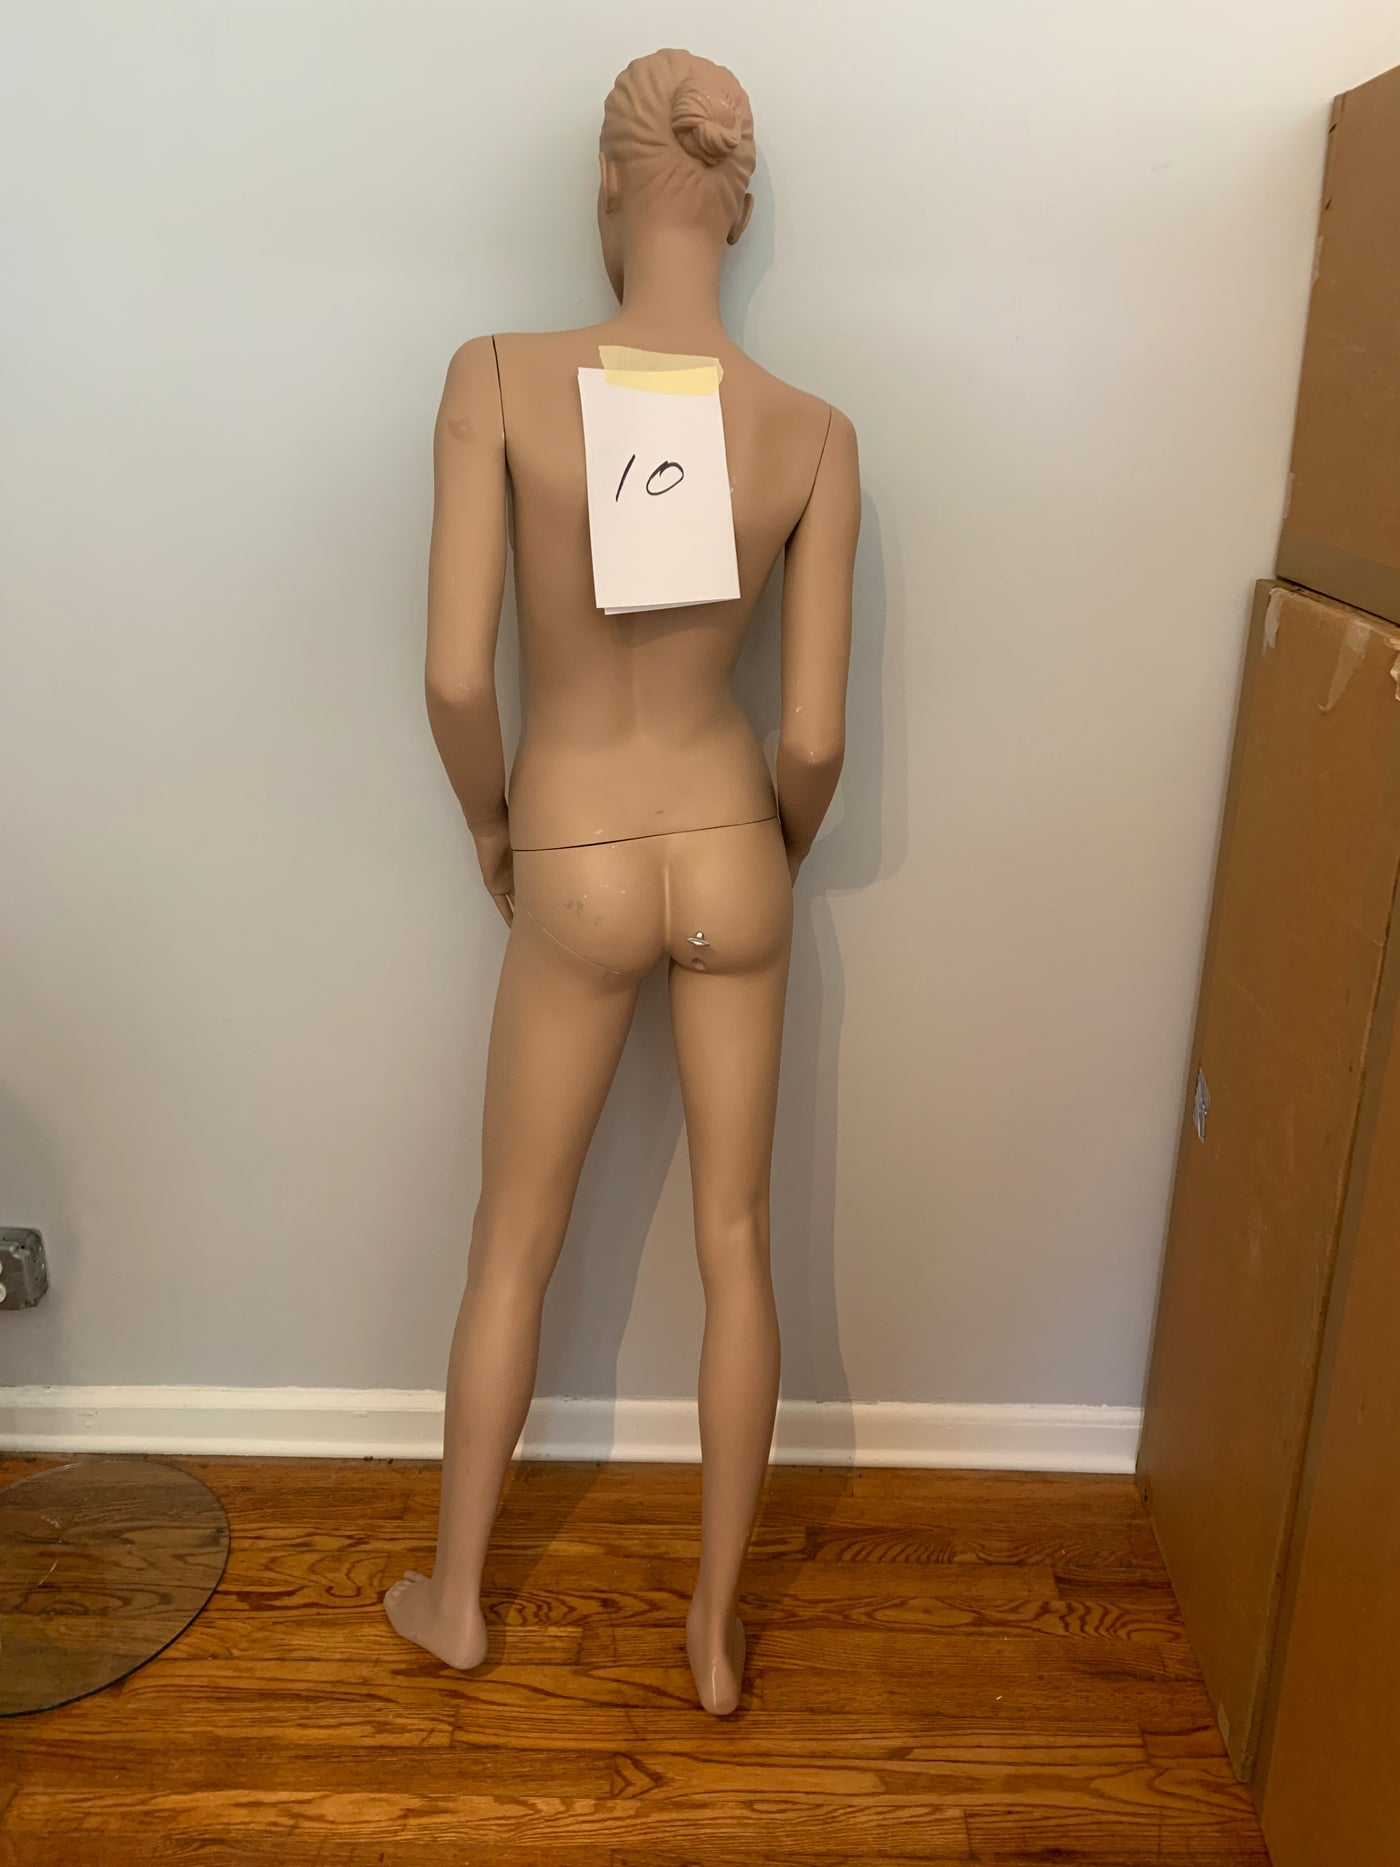 Used Rootstein Female Mannequin #10